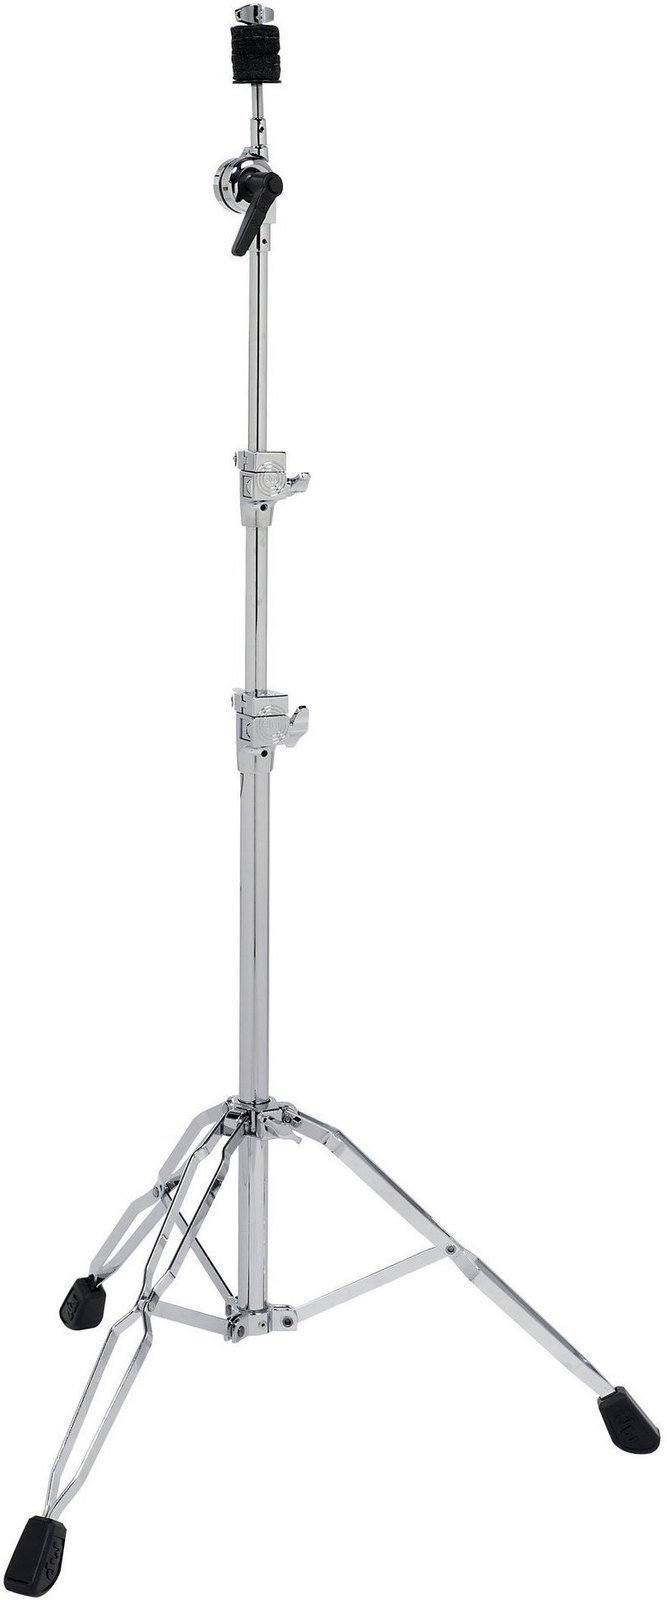 Straight Cymbal Stand DW 3710 Straight Cymbal Stand